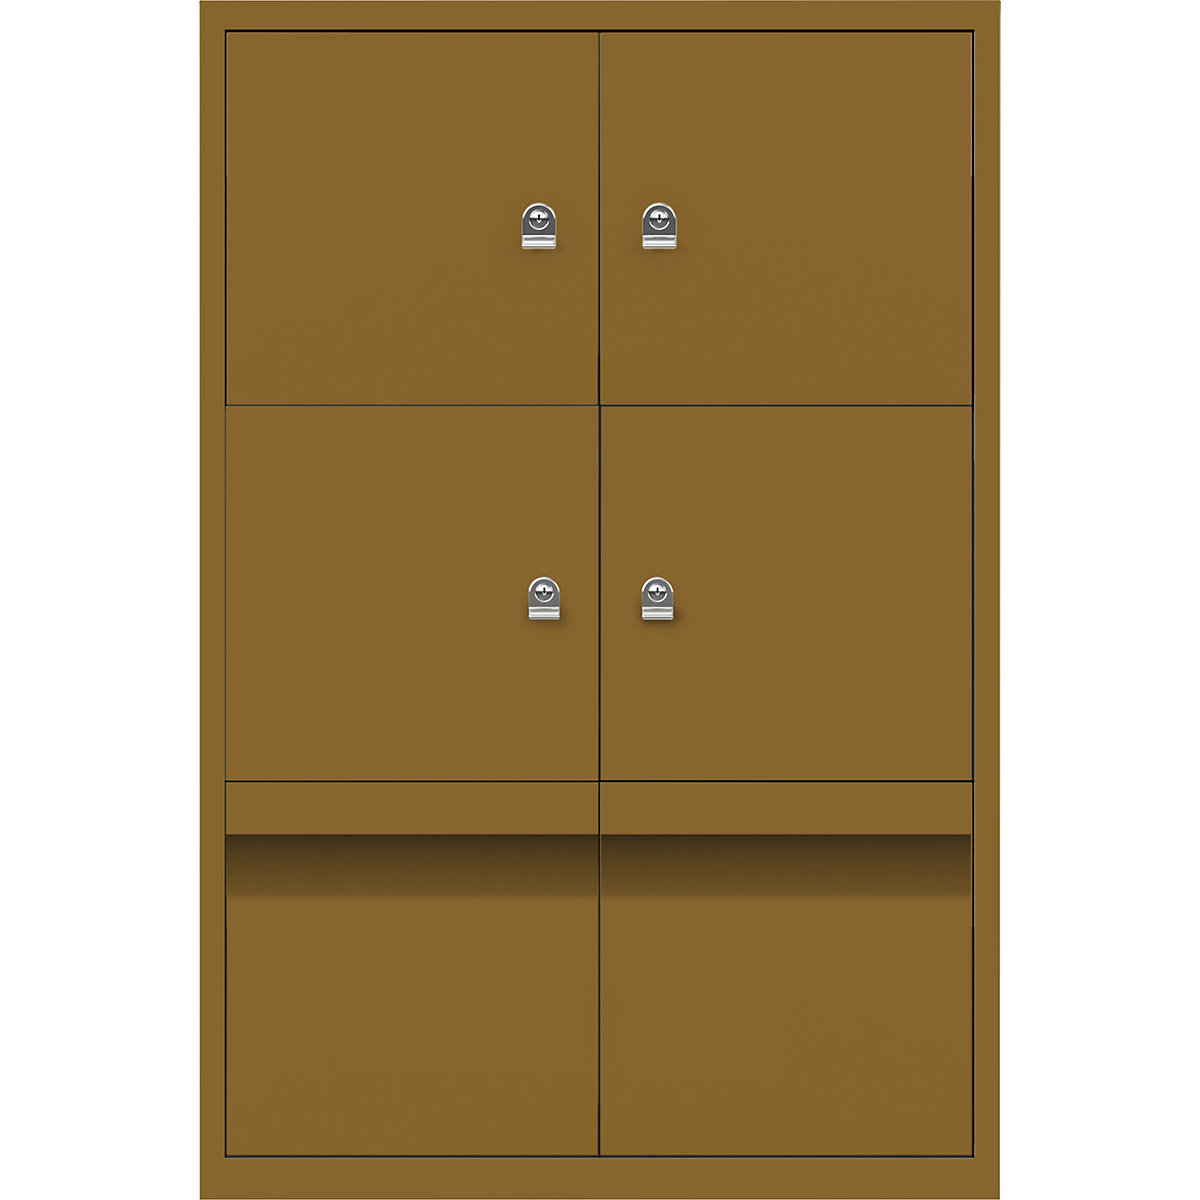 LateralFile™ lodge – BISLEY, with 4 lockable compartments and 2 drawers, height 375 mm each, dijon-15